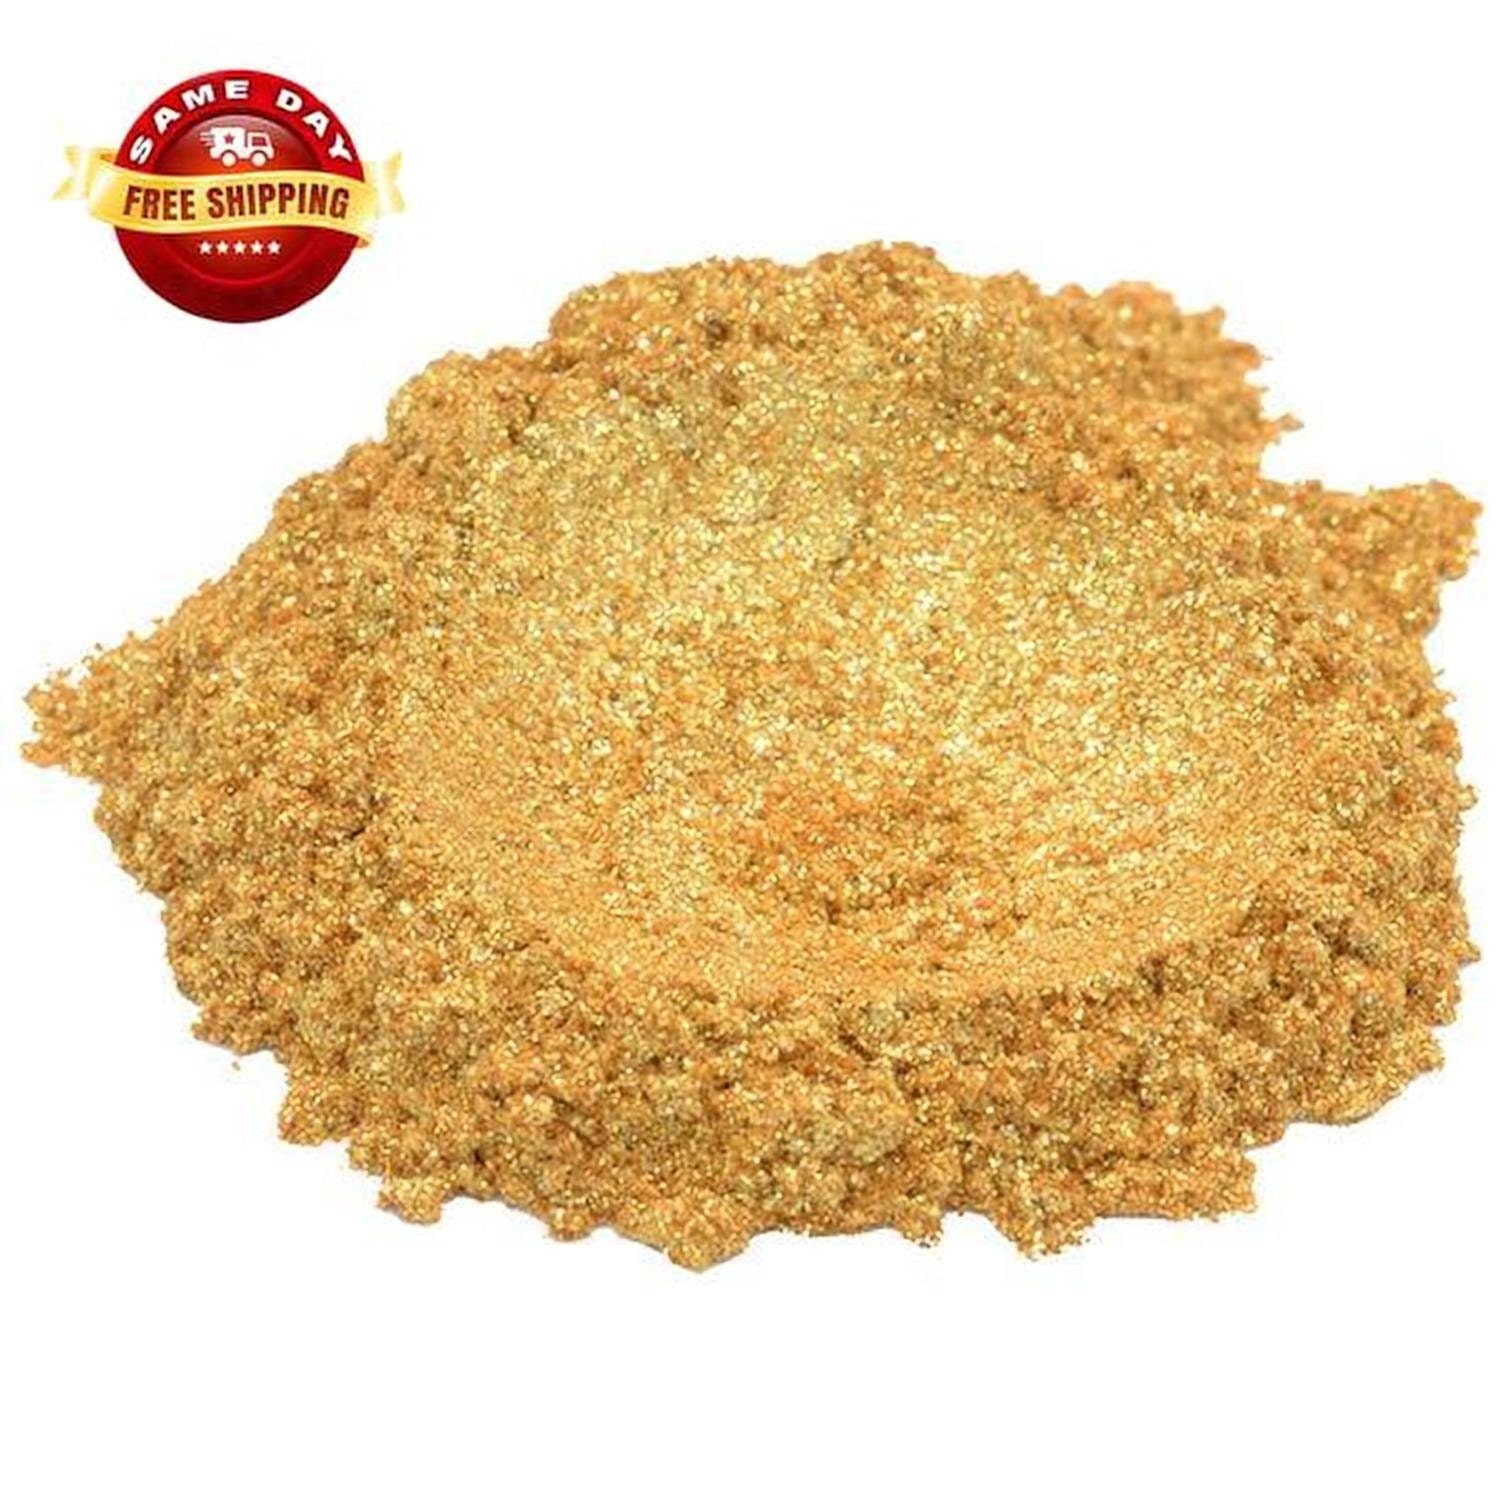 Cosmetic Grade Gold Powder  Wholesale Gold Dust for Skin Care in Bulk